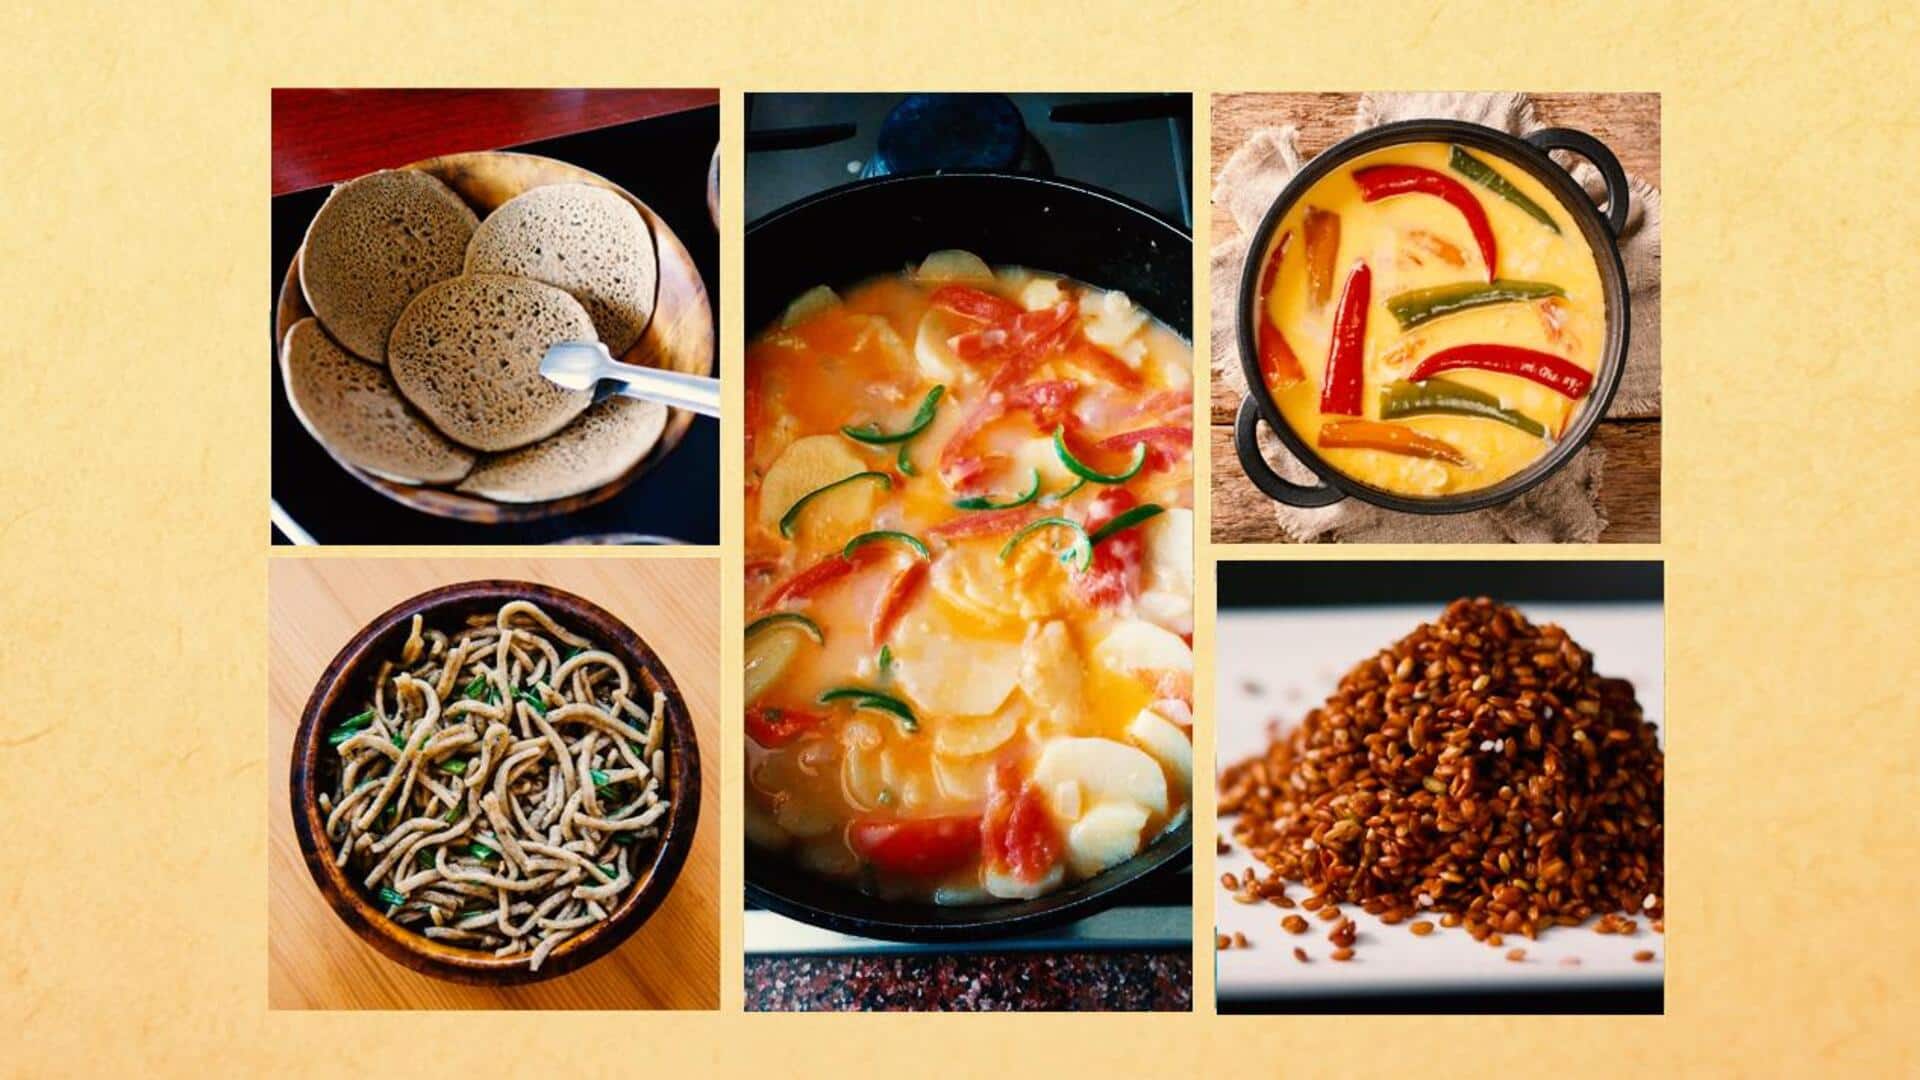 A vegetarian in Bhutan can eat these foods